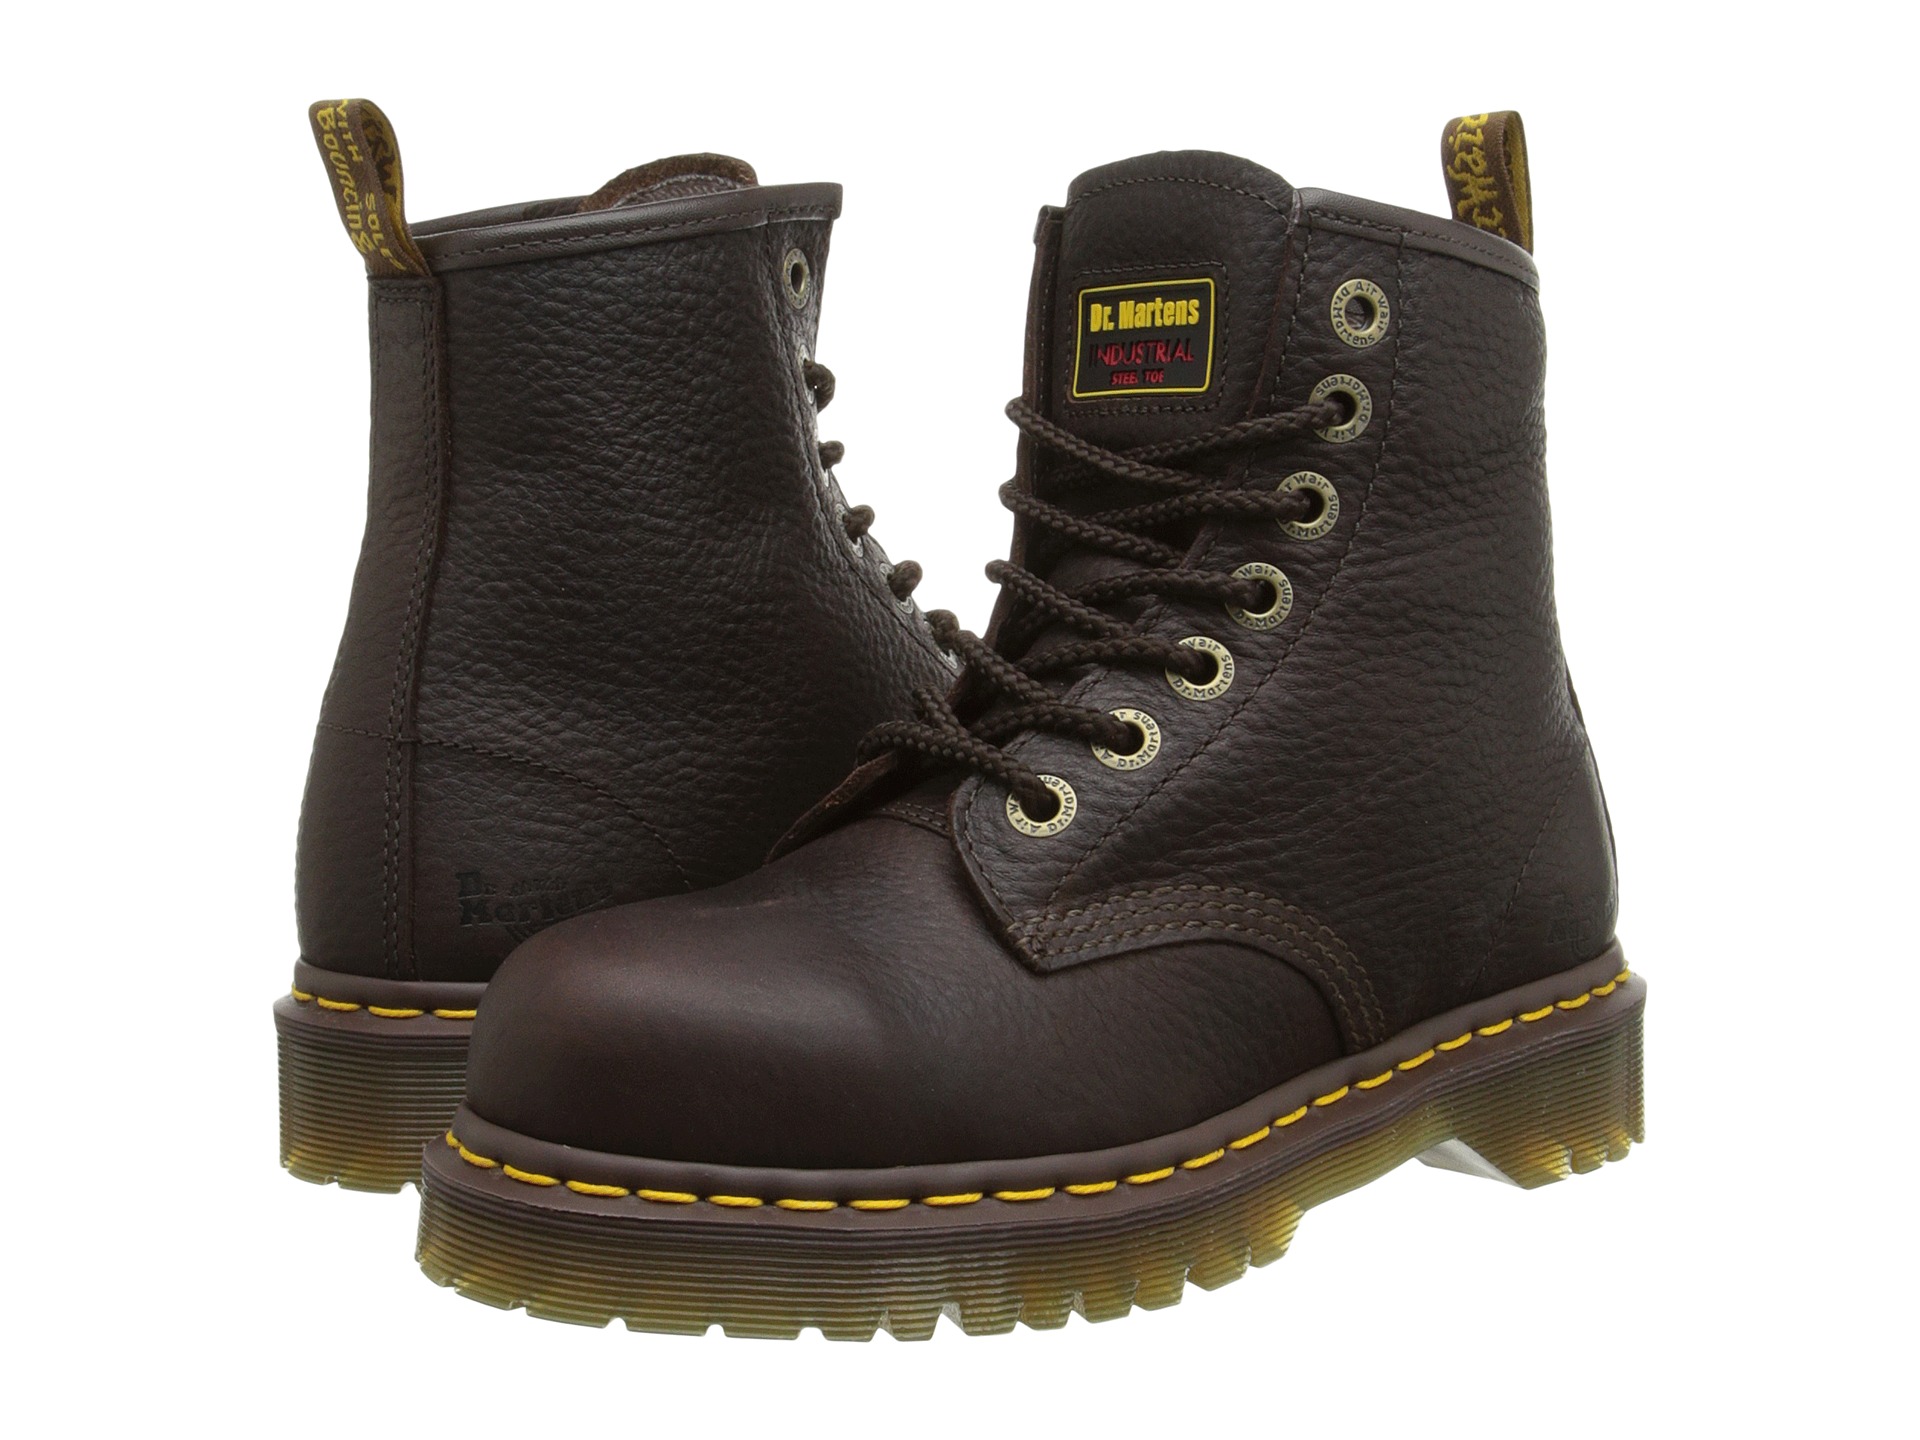 Dr. Martens Work 7B10 ST 7 Eye Boot at Zappos.com